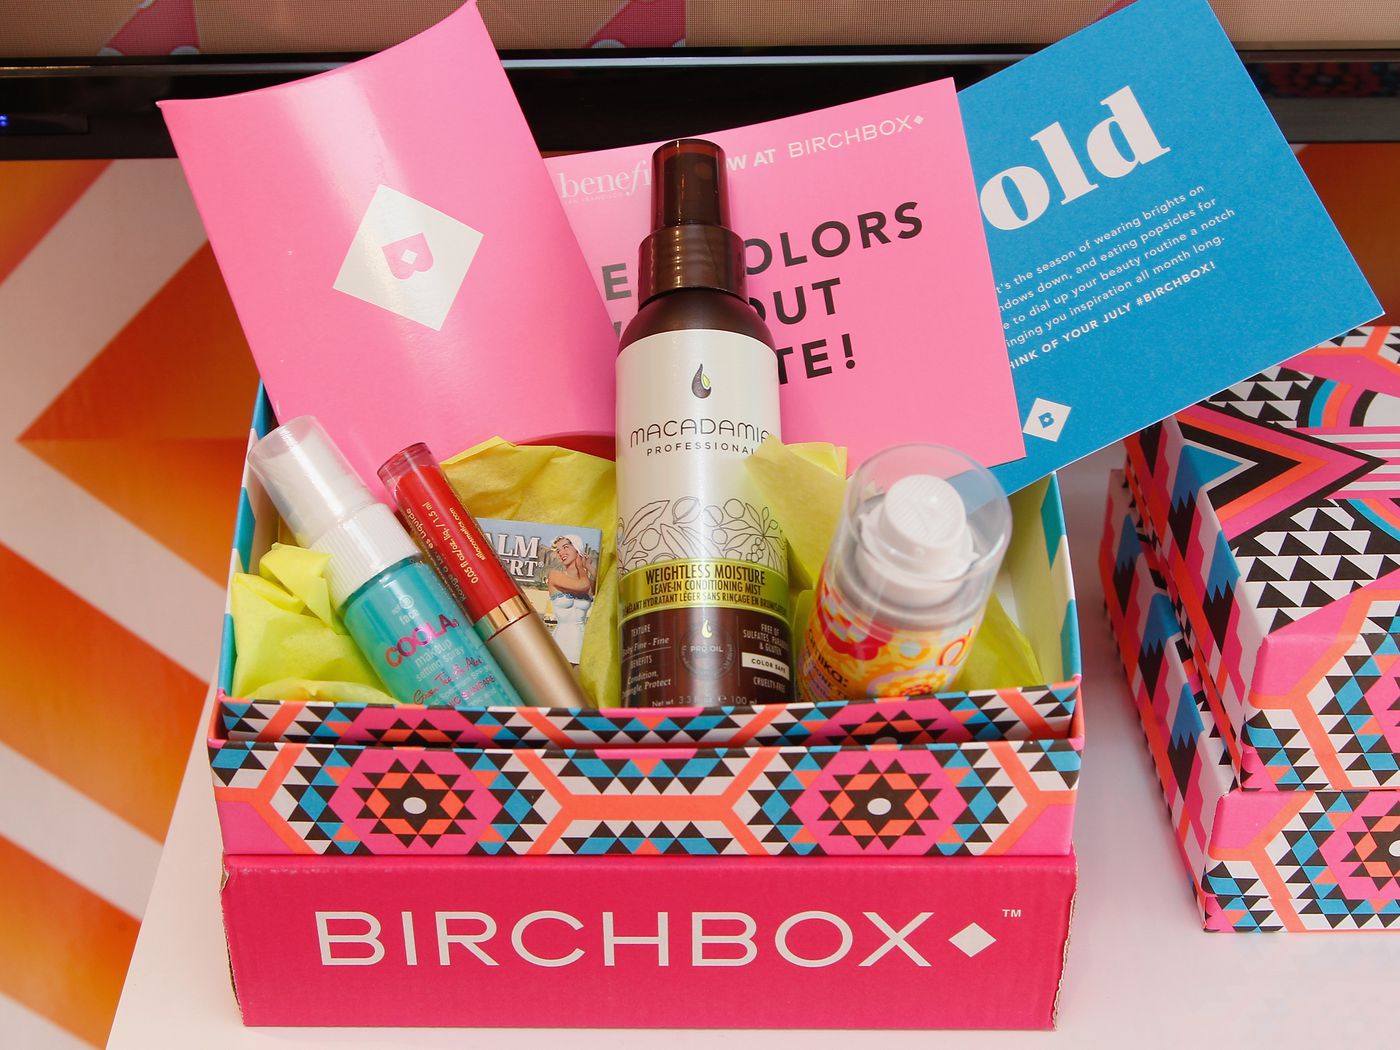 Birchbox Coupon: 60% OFF First Box with 6-Month Subscription!